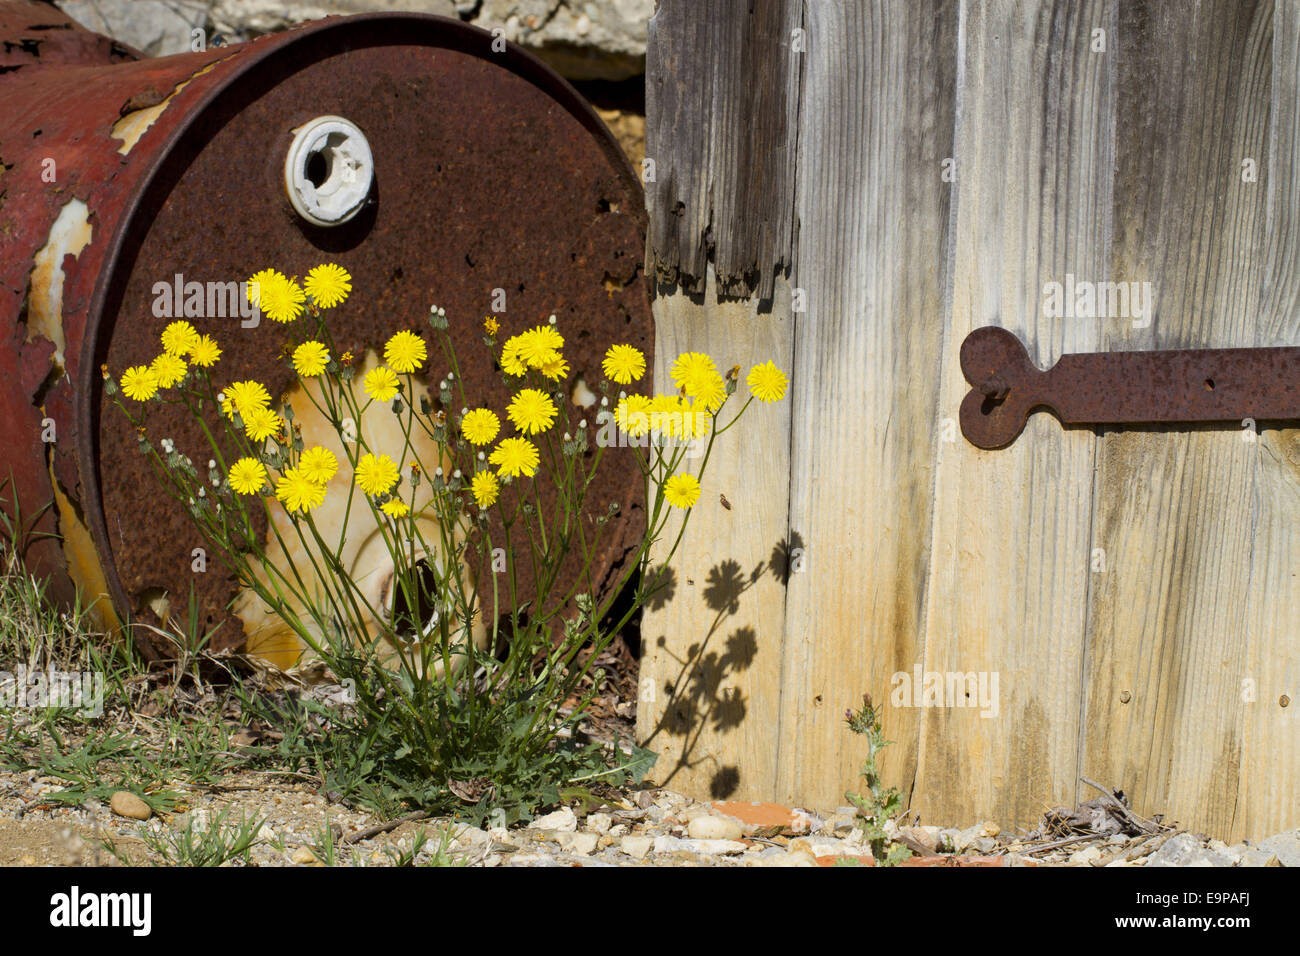 French Hawksbeard (Crepis nicaeensis) flowering, growing beside old door and rusty barrel at edge of vineyard, Ile St. Martin, Aude, Languedoc-Roussillon, France, May Stock Photo